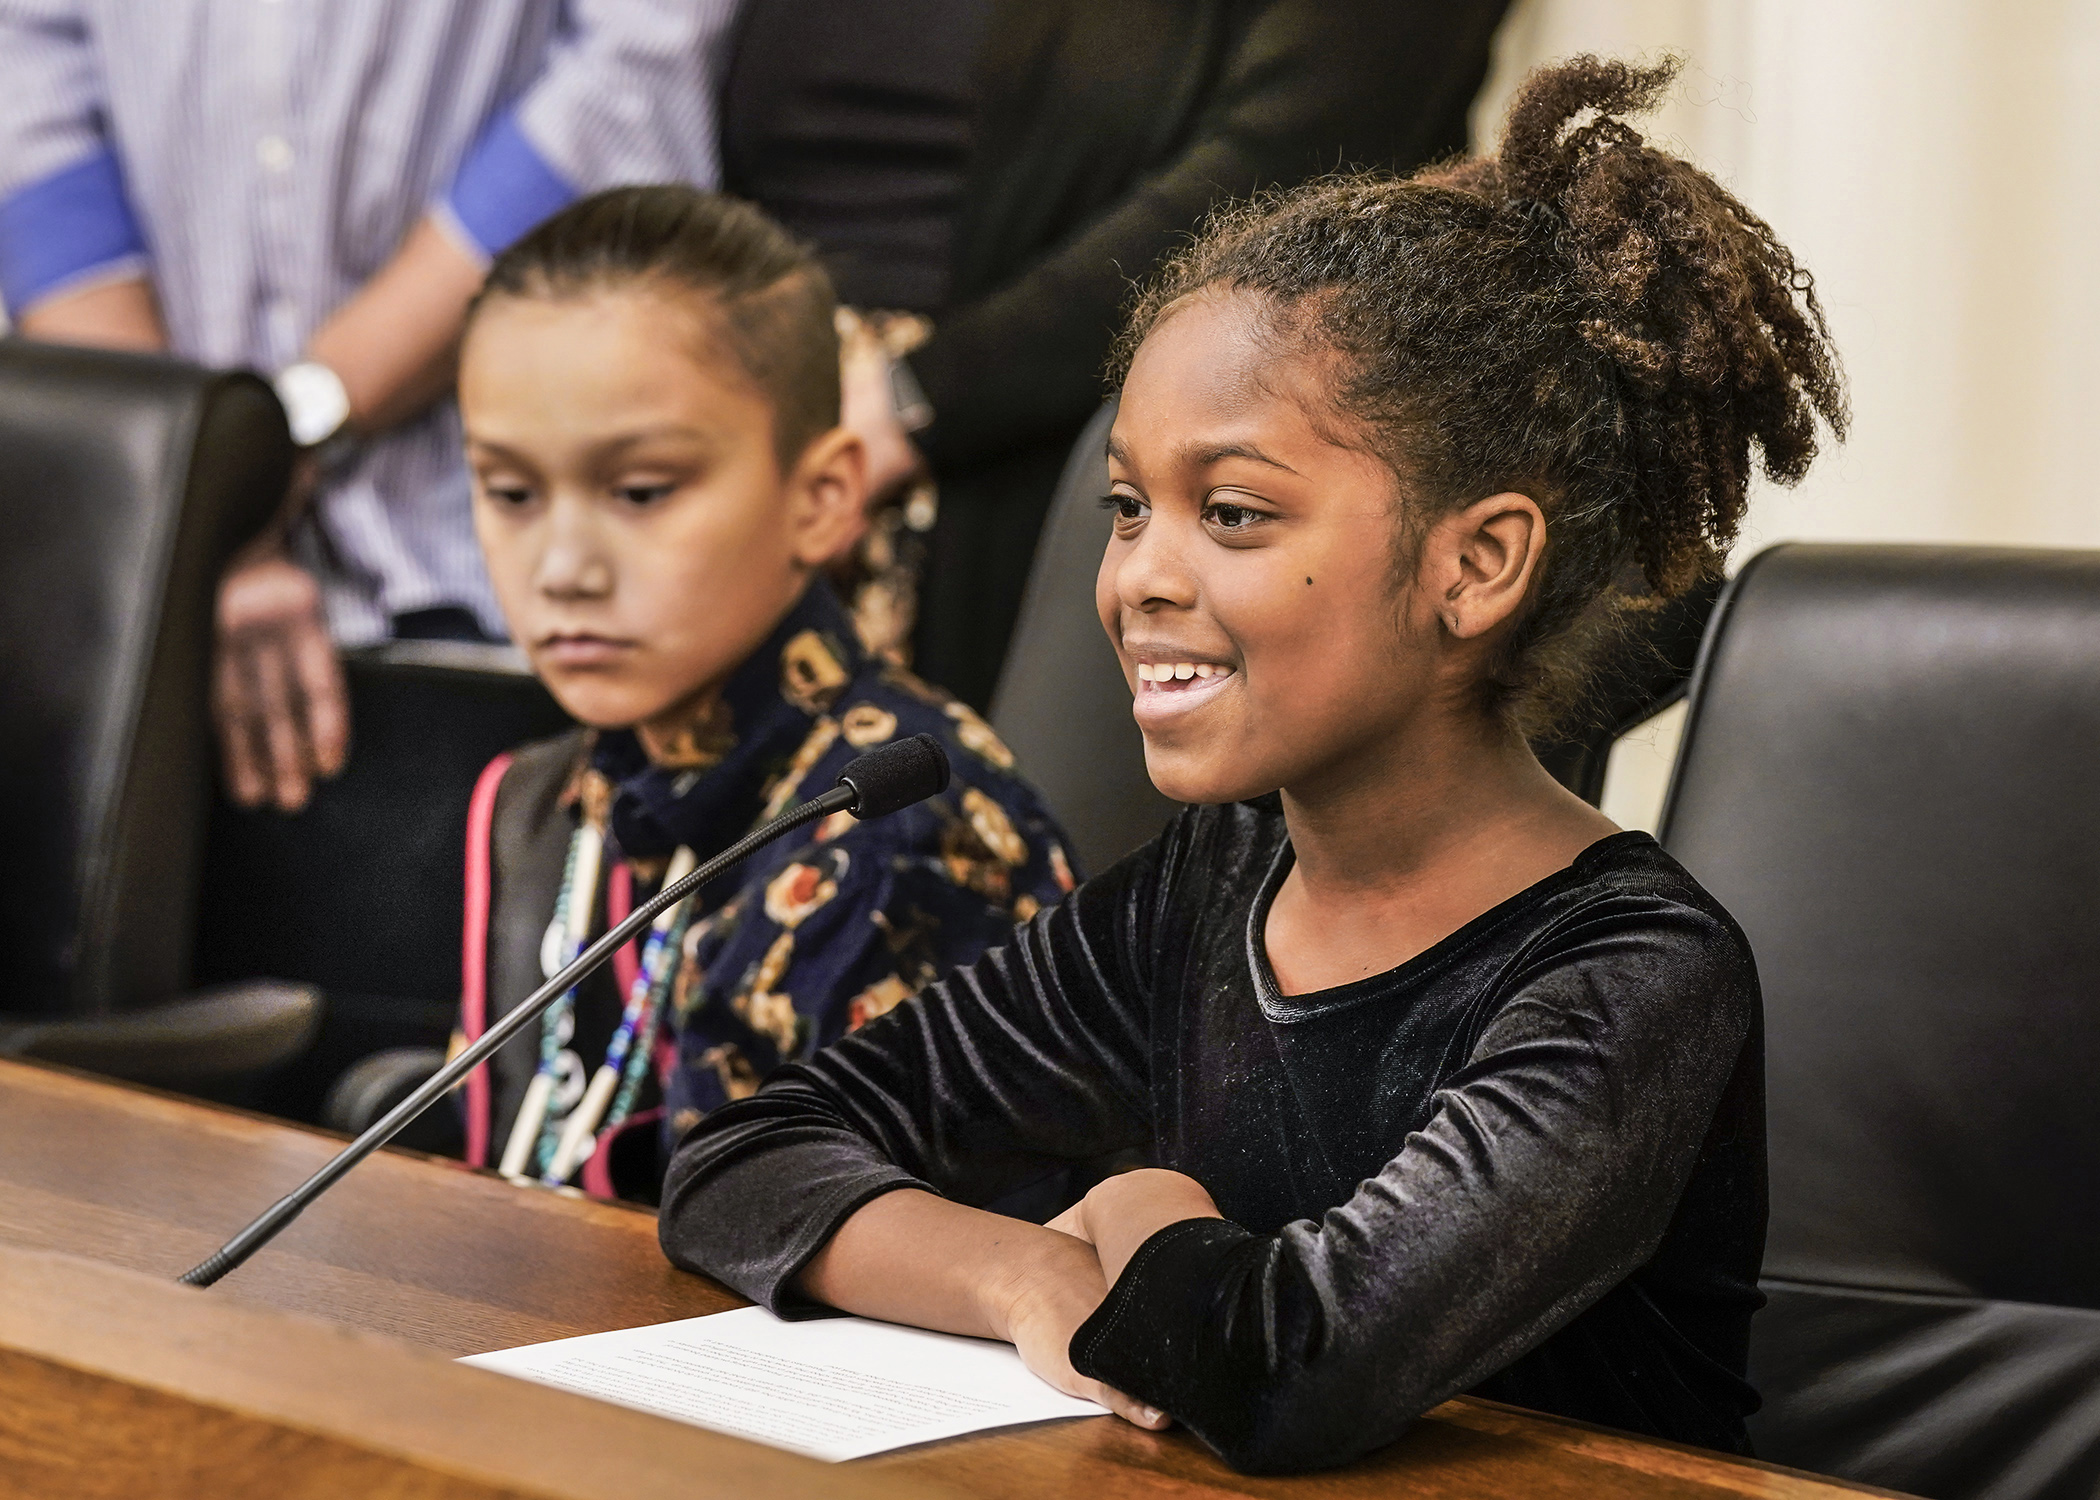 Azomali Obisakin a fourth-grade student at Riverview Elementary School, testifies before the House Education Policy Committee Jan. 18 in support of HF320 that would increase the percentage of teachers of color in Minnesota schools. (Photo by Catherine Davis